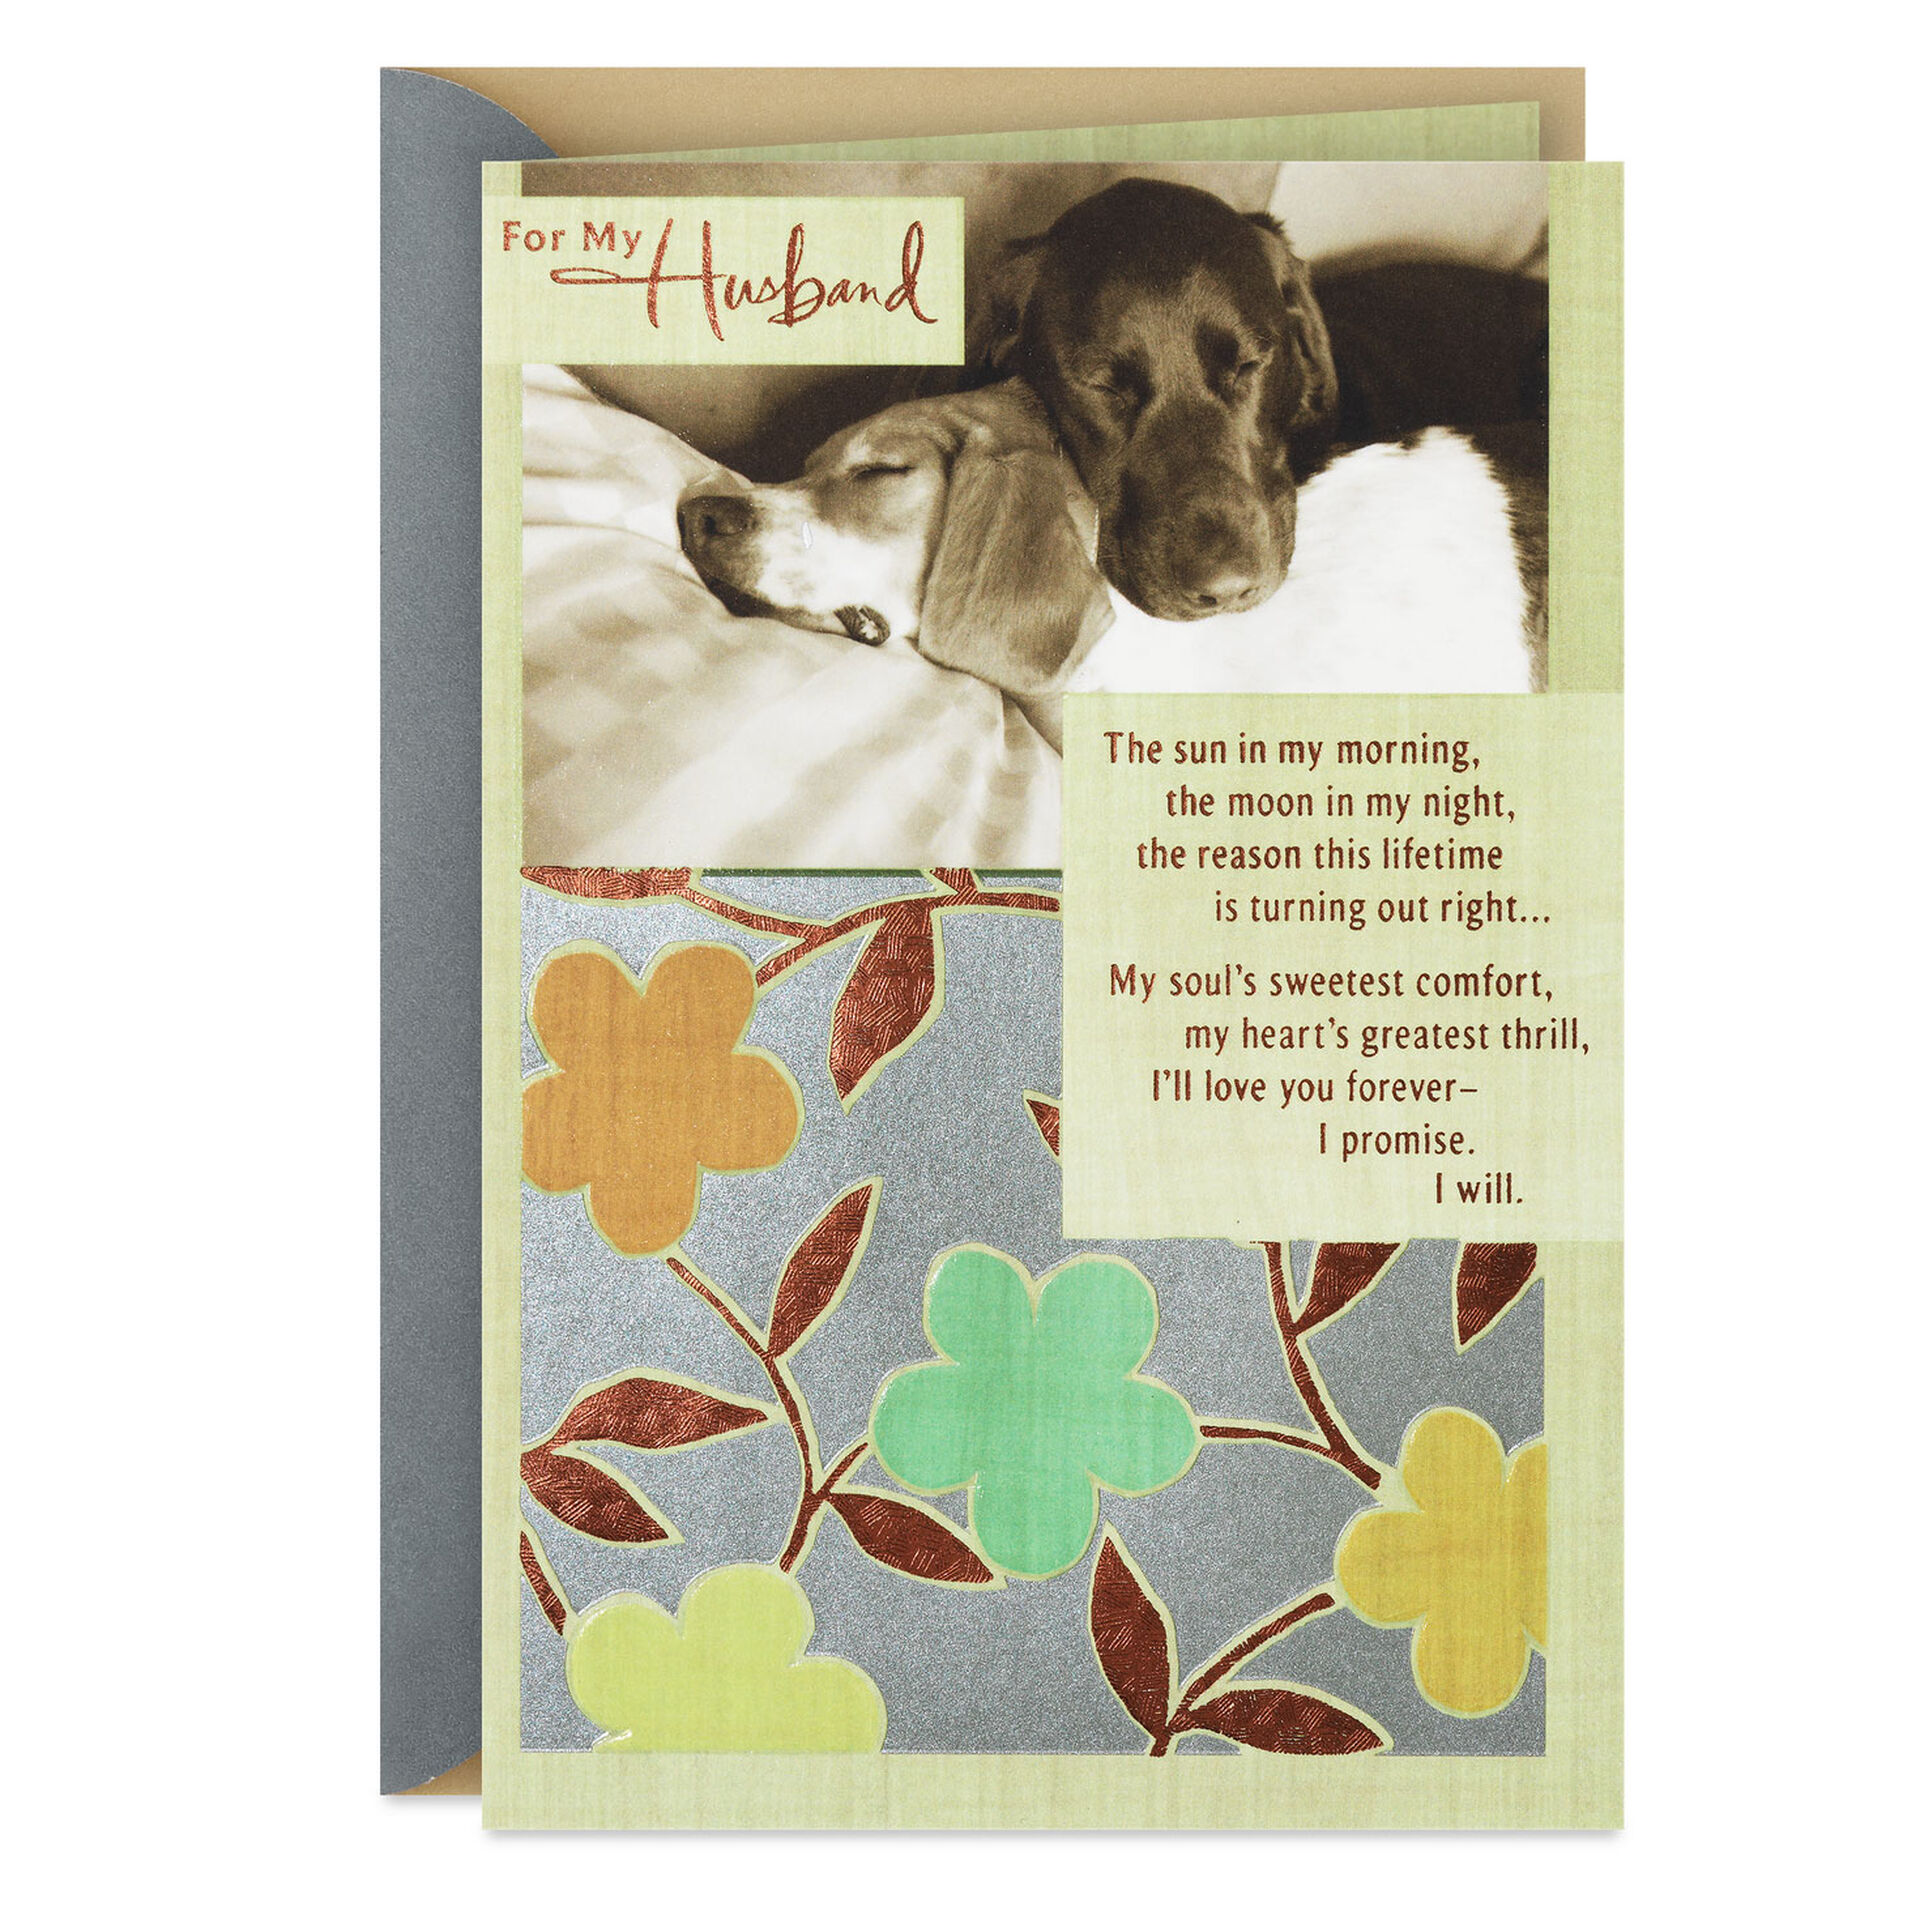 Cuddling-Dogs-Anniversary-Card-for-Husband_499AVY9972_01